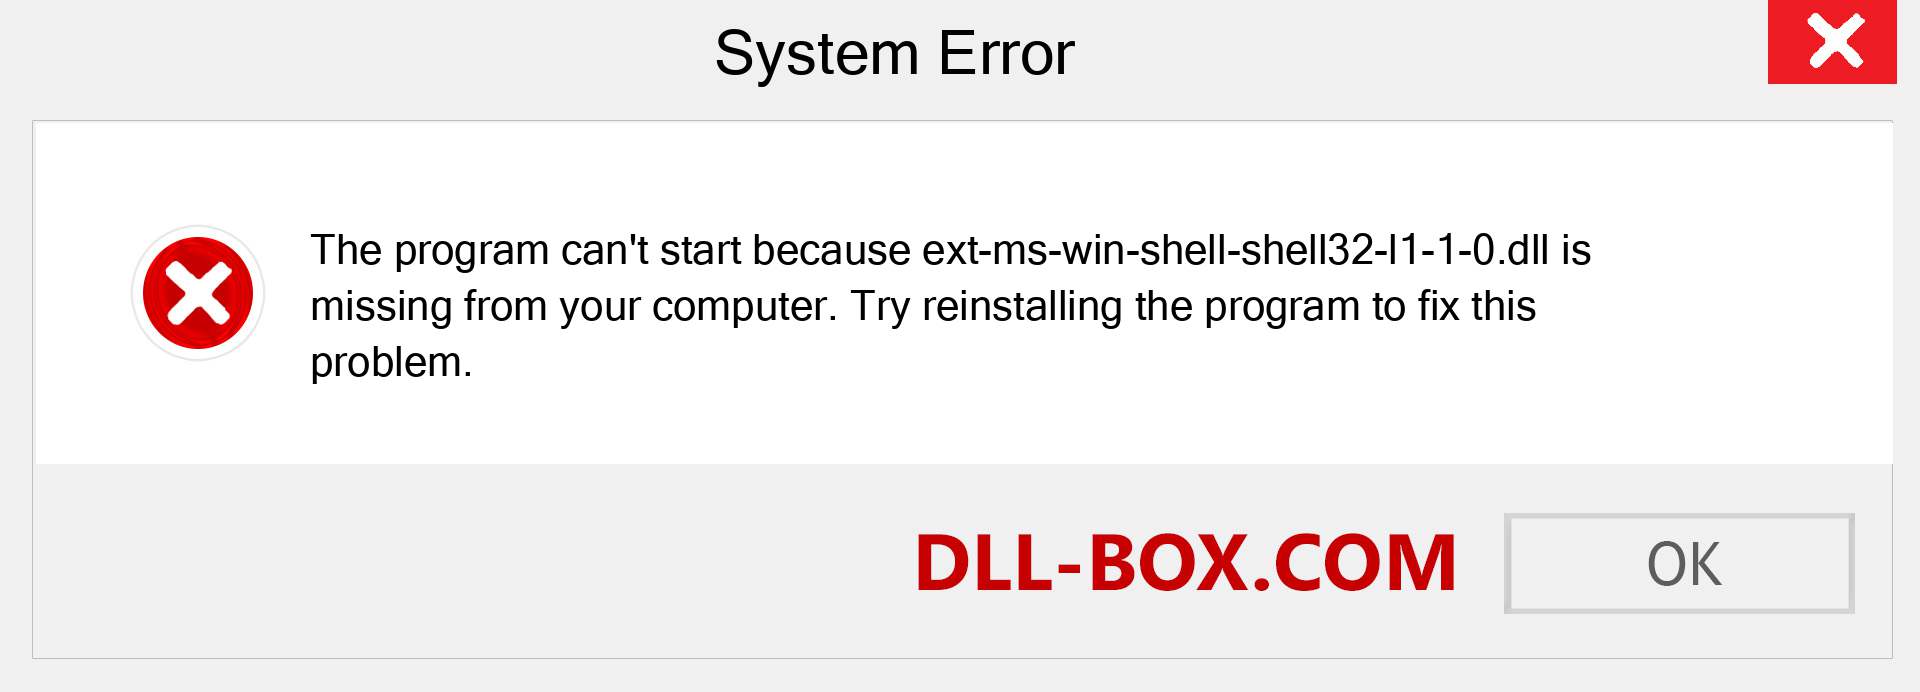  ext-ms-win-shell-shell32-l1-1-0.dll file is missing?. Download for Windows 7, 8, 10 - Fix  ext-ms-win-shell-shell32-l1-1-0 dll Missing Error on Windows, photos, images